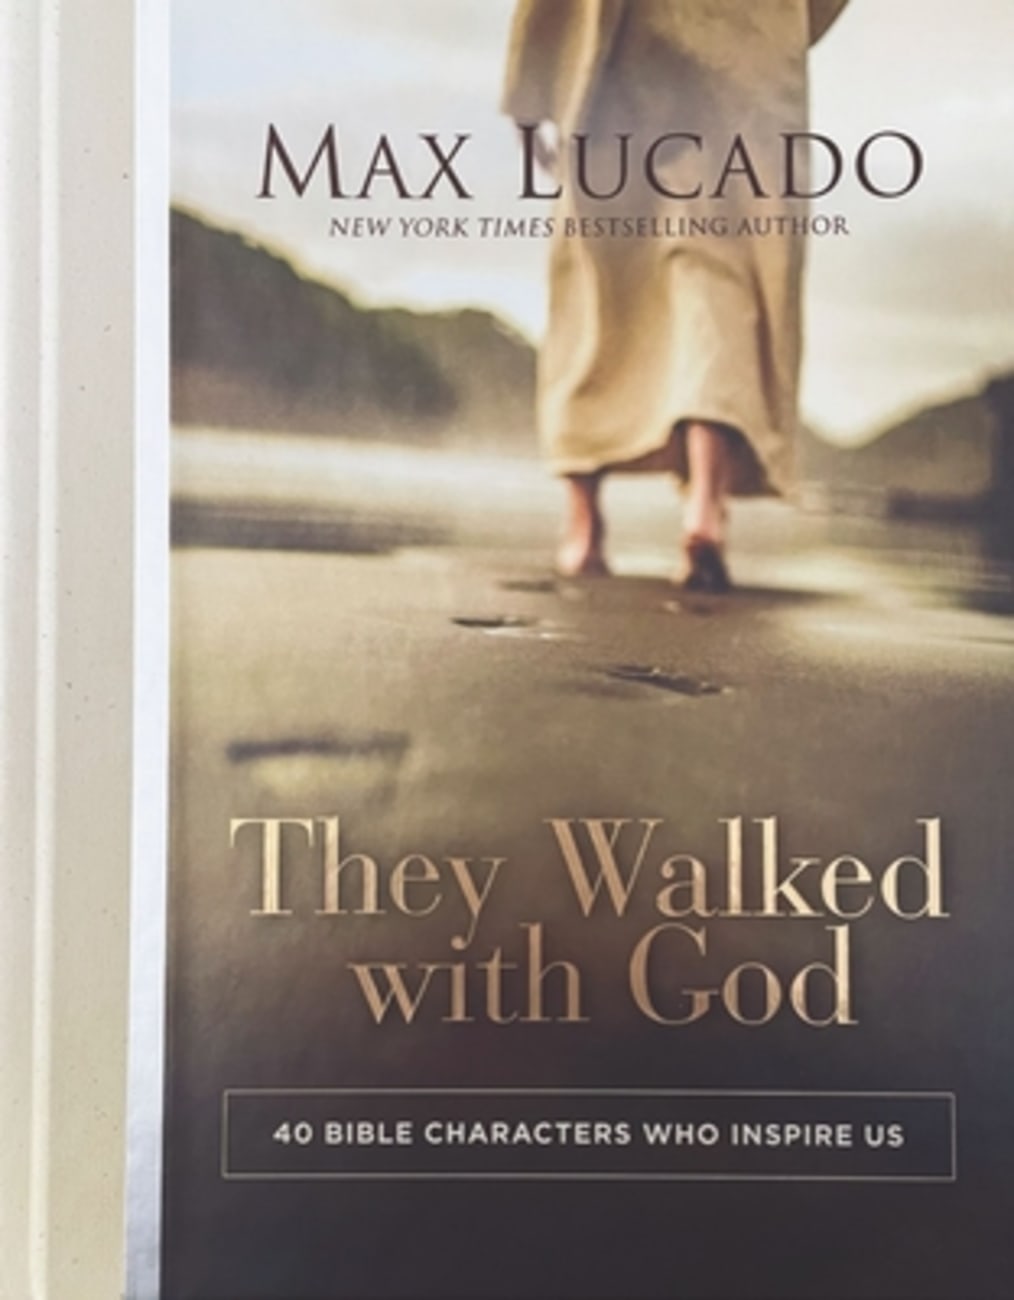 THEY WALKED WITH GOD: 40 BIBLE CHARACTERS WHO INSPIRE US